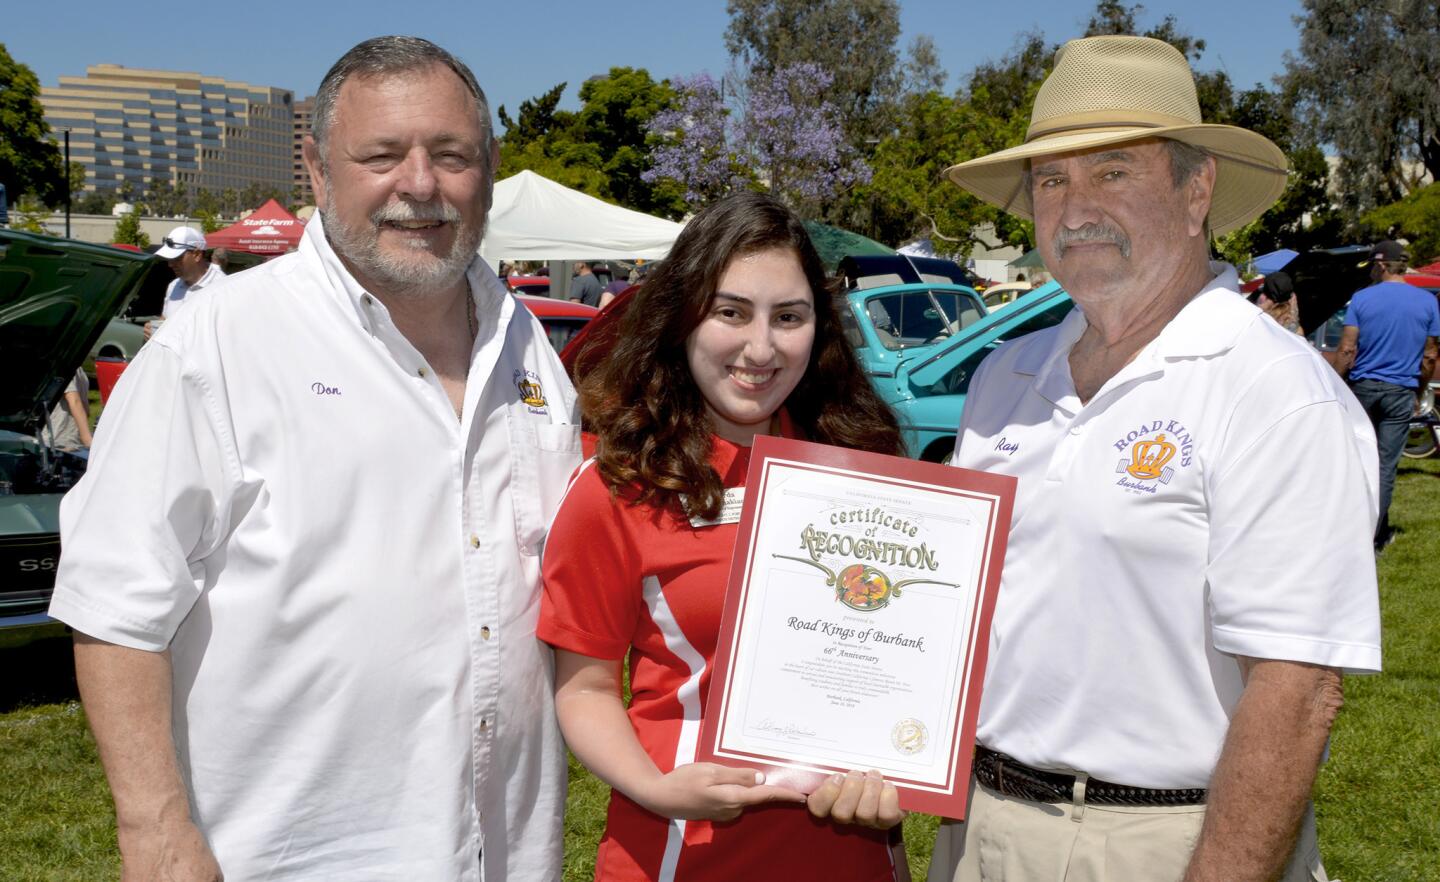 Honoring the Road Kings, represented by show Chairman Don Baldaseroni, left, and President Ray Astamendi, Arda Tchakian presented a certificate of recognition on behalf of state Senator Anthony Portantino.